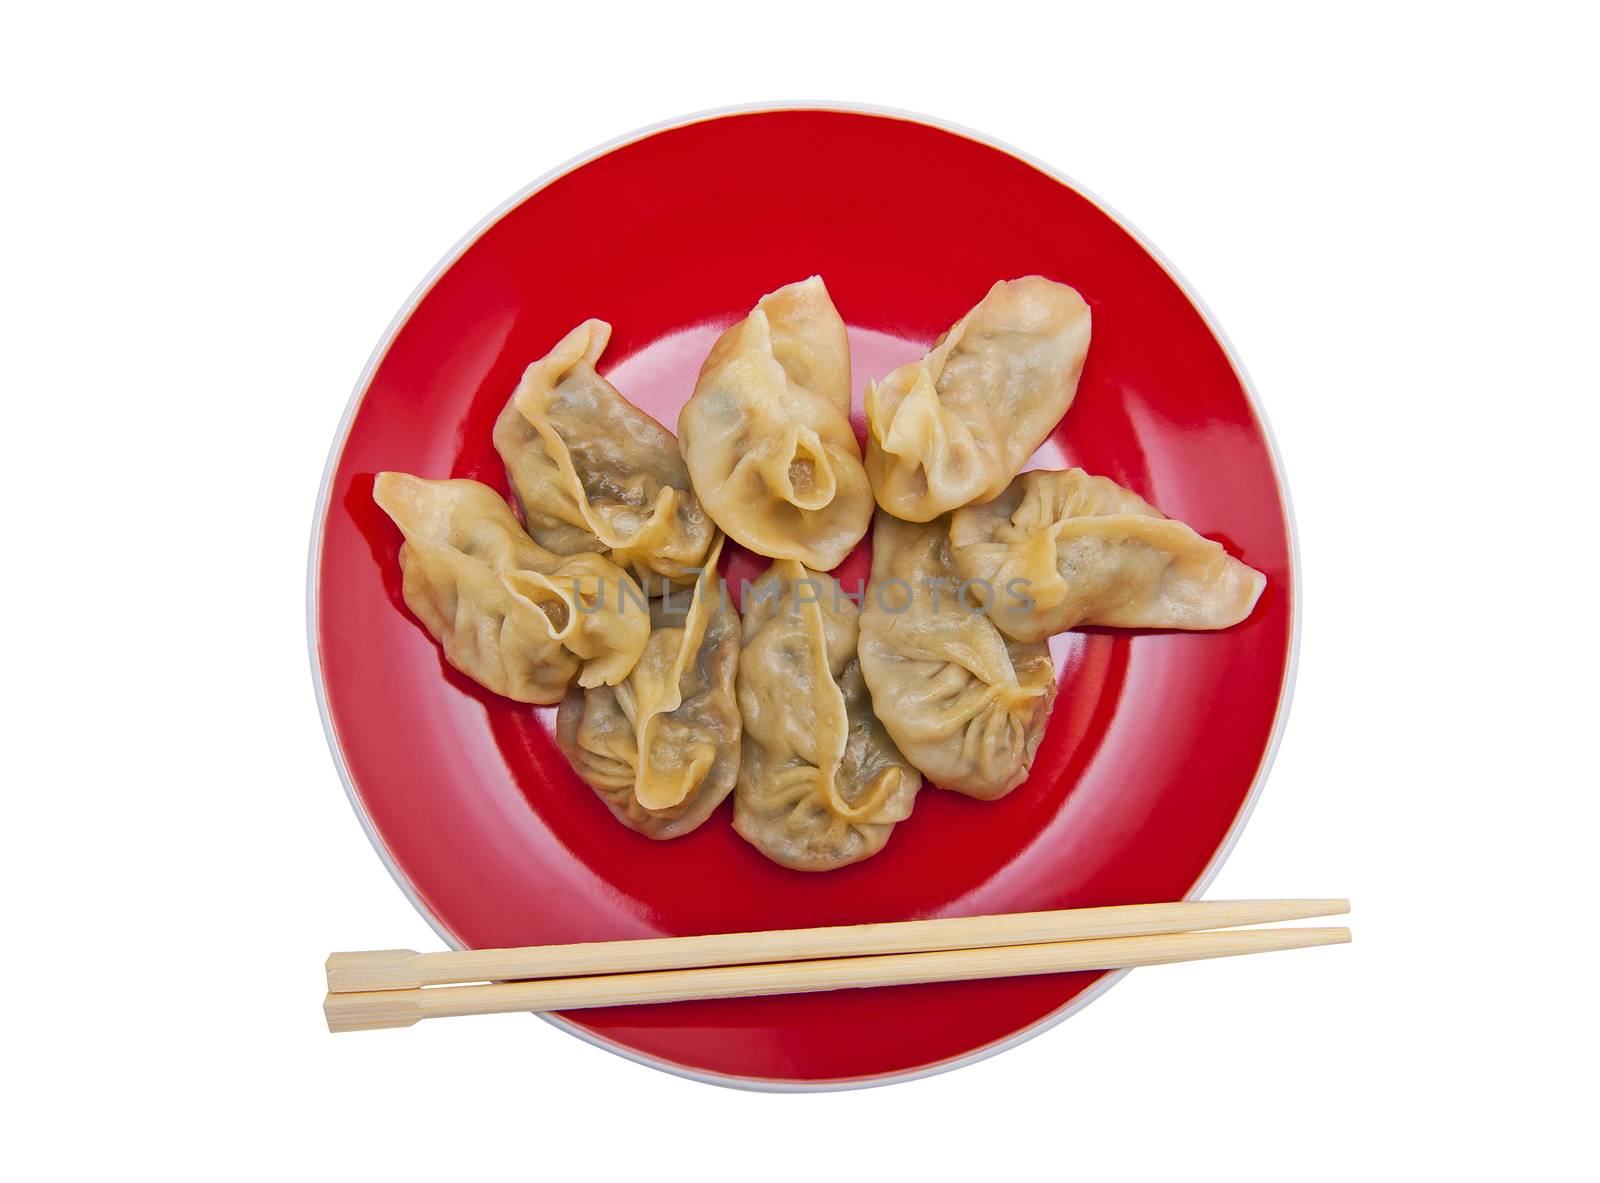 Dumplings on the red plate isolated on the white background by Yaurinko